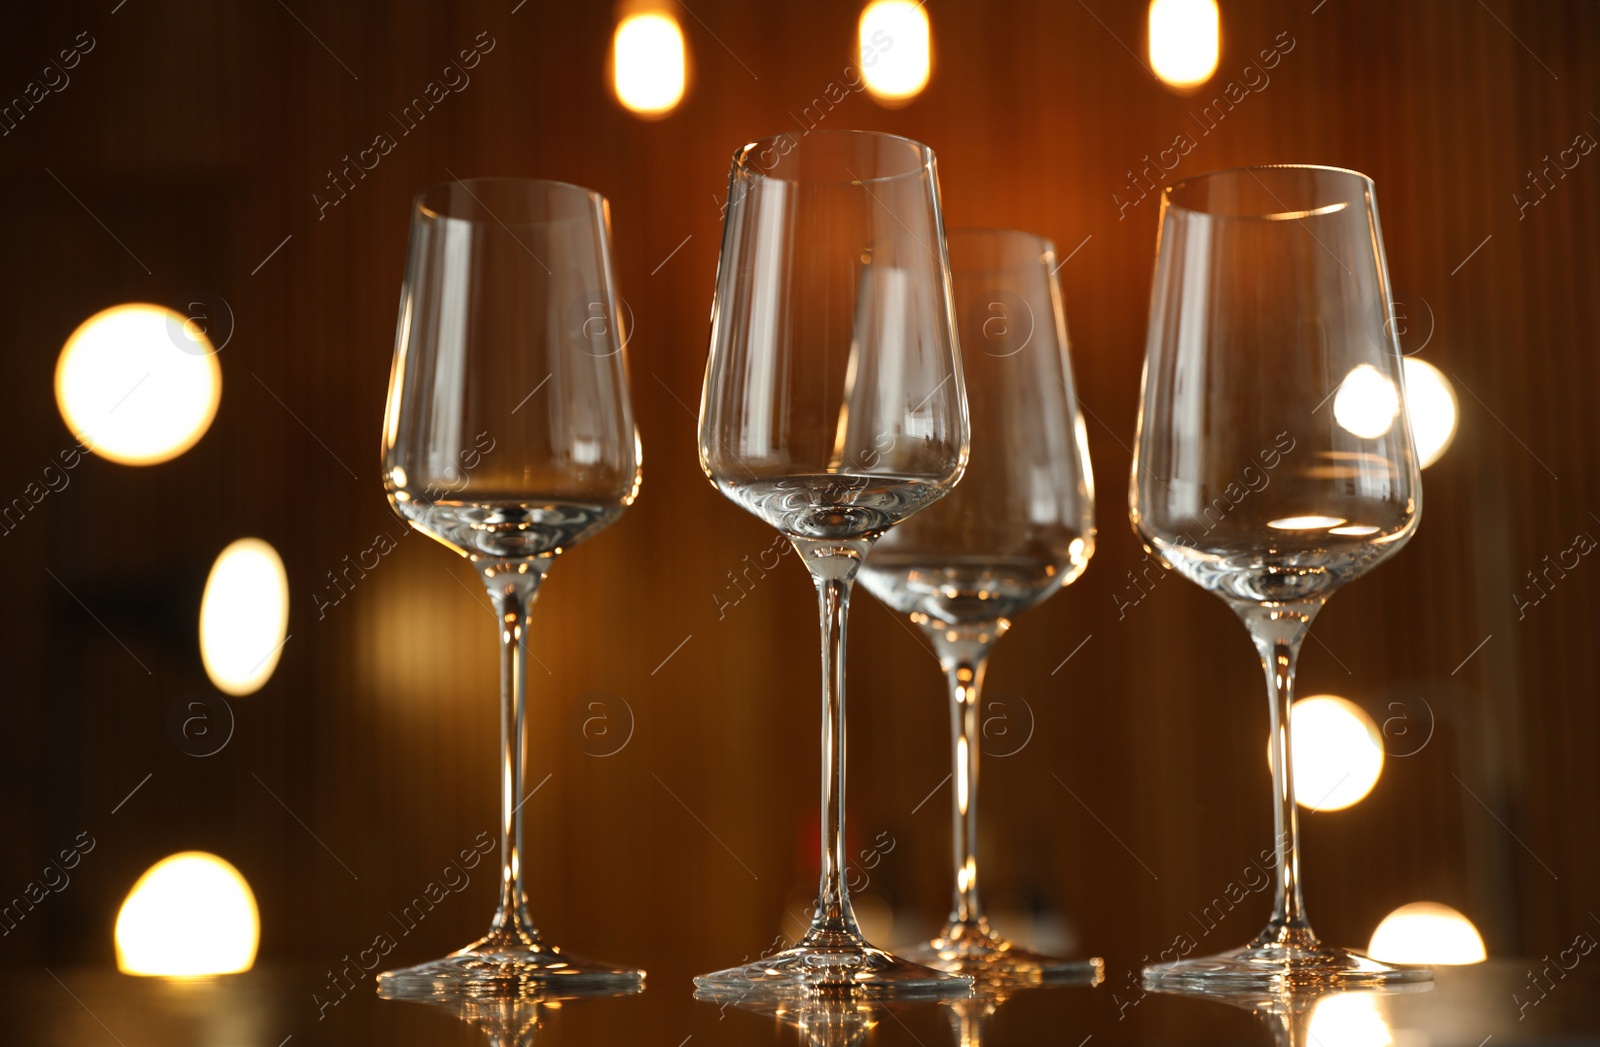 Photo of Empty wine glasses on table against blurred background